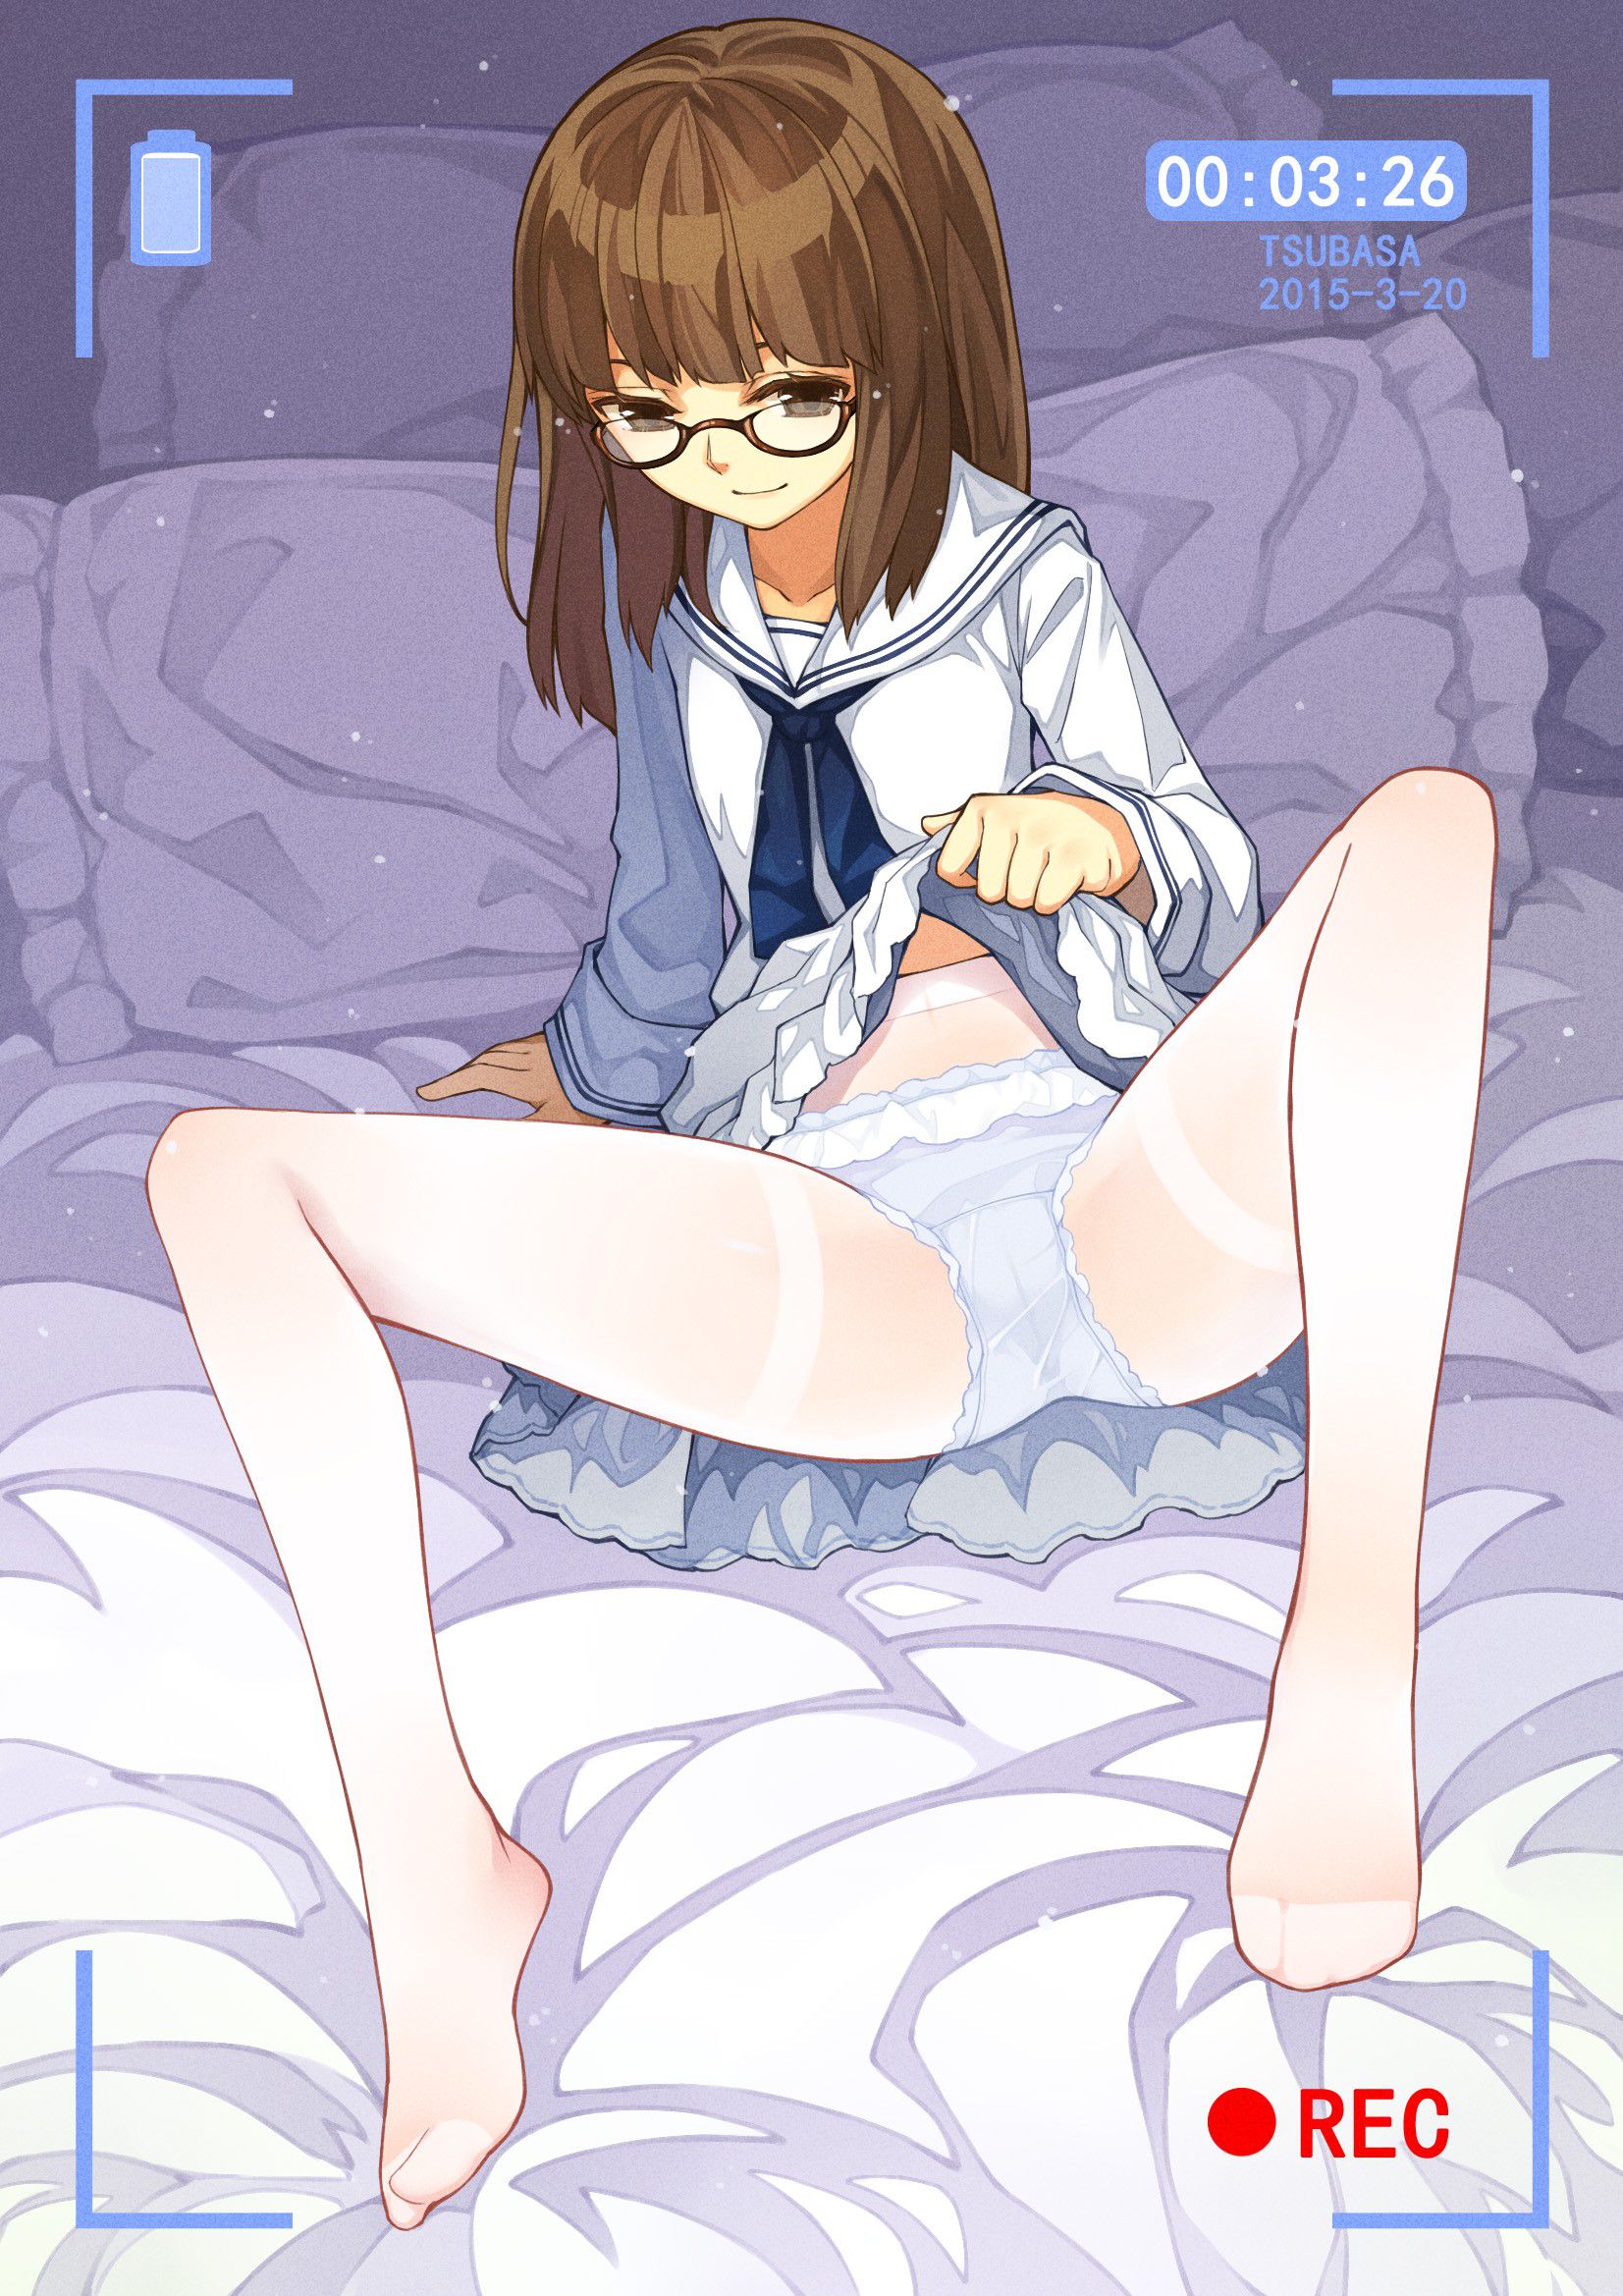 Secondary erotic erotic erotic image of a real lewd glasses girl who looks serious is here 31